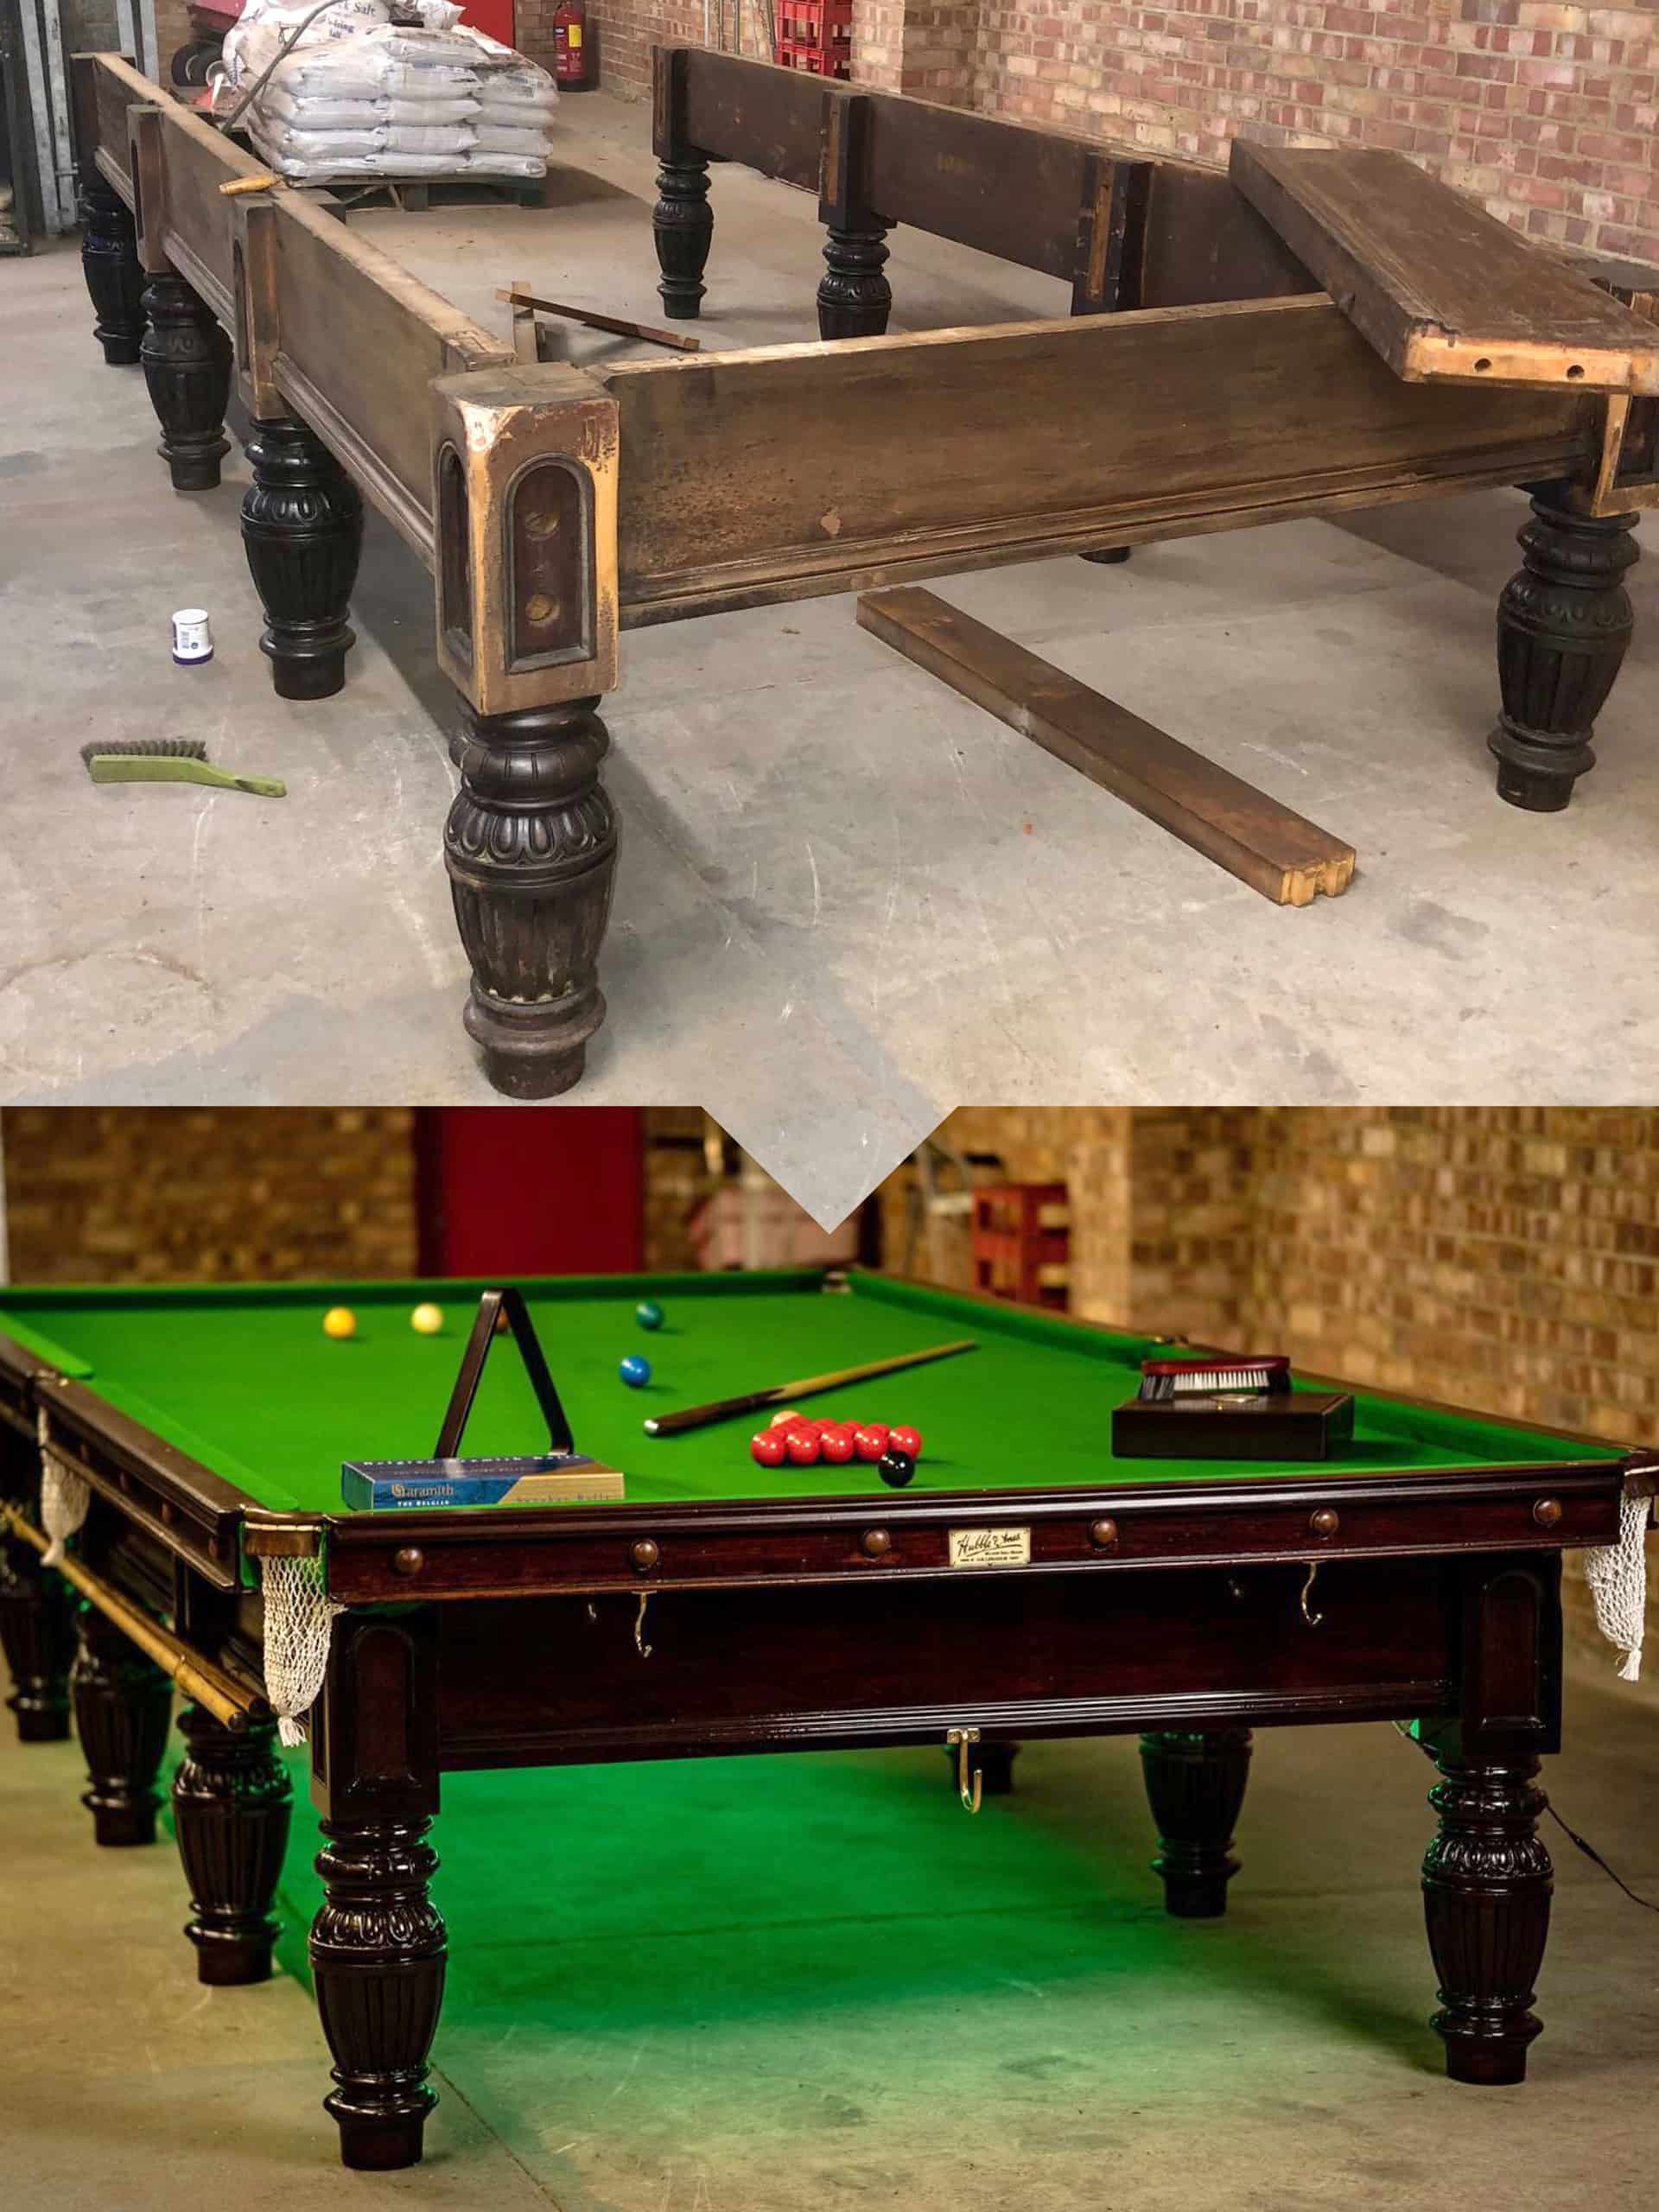 Refurbished snooker table before and after